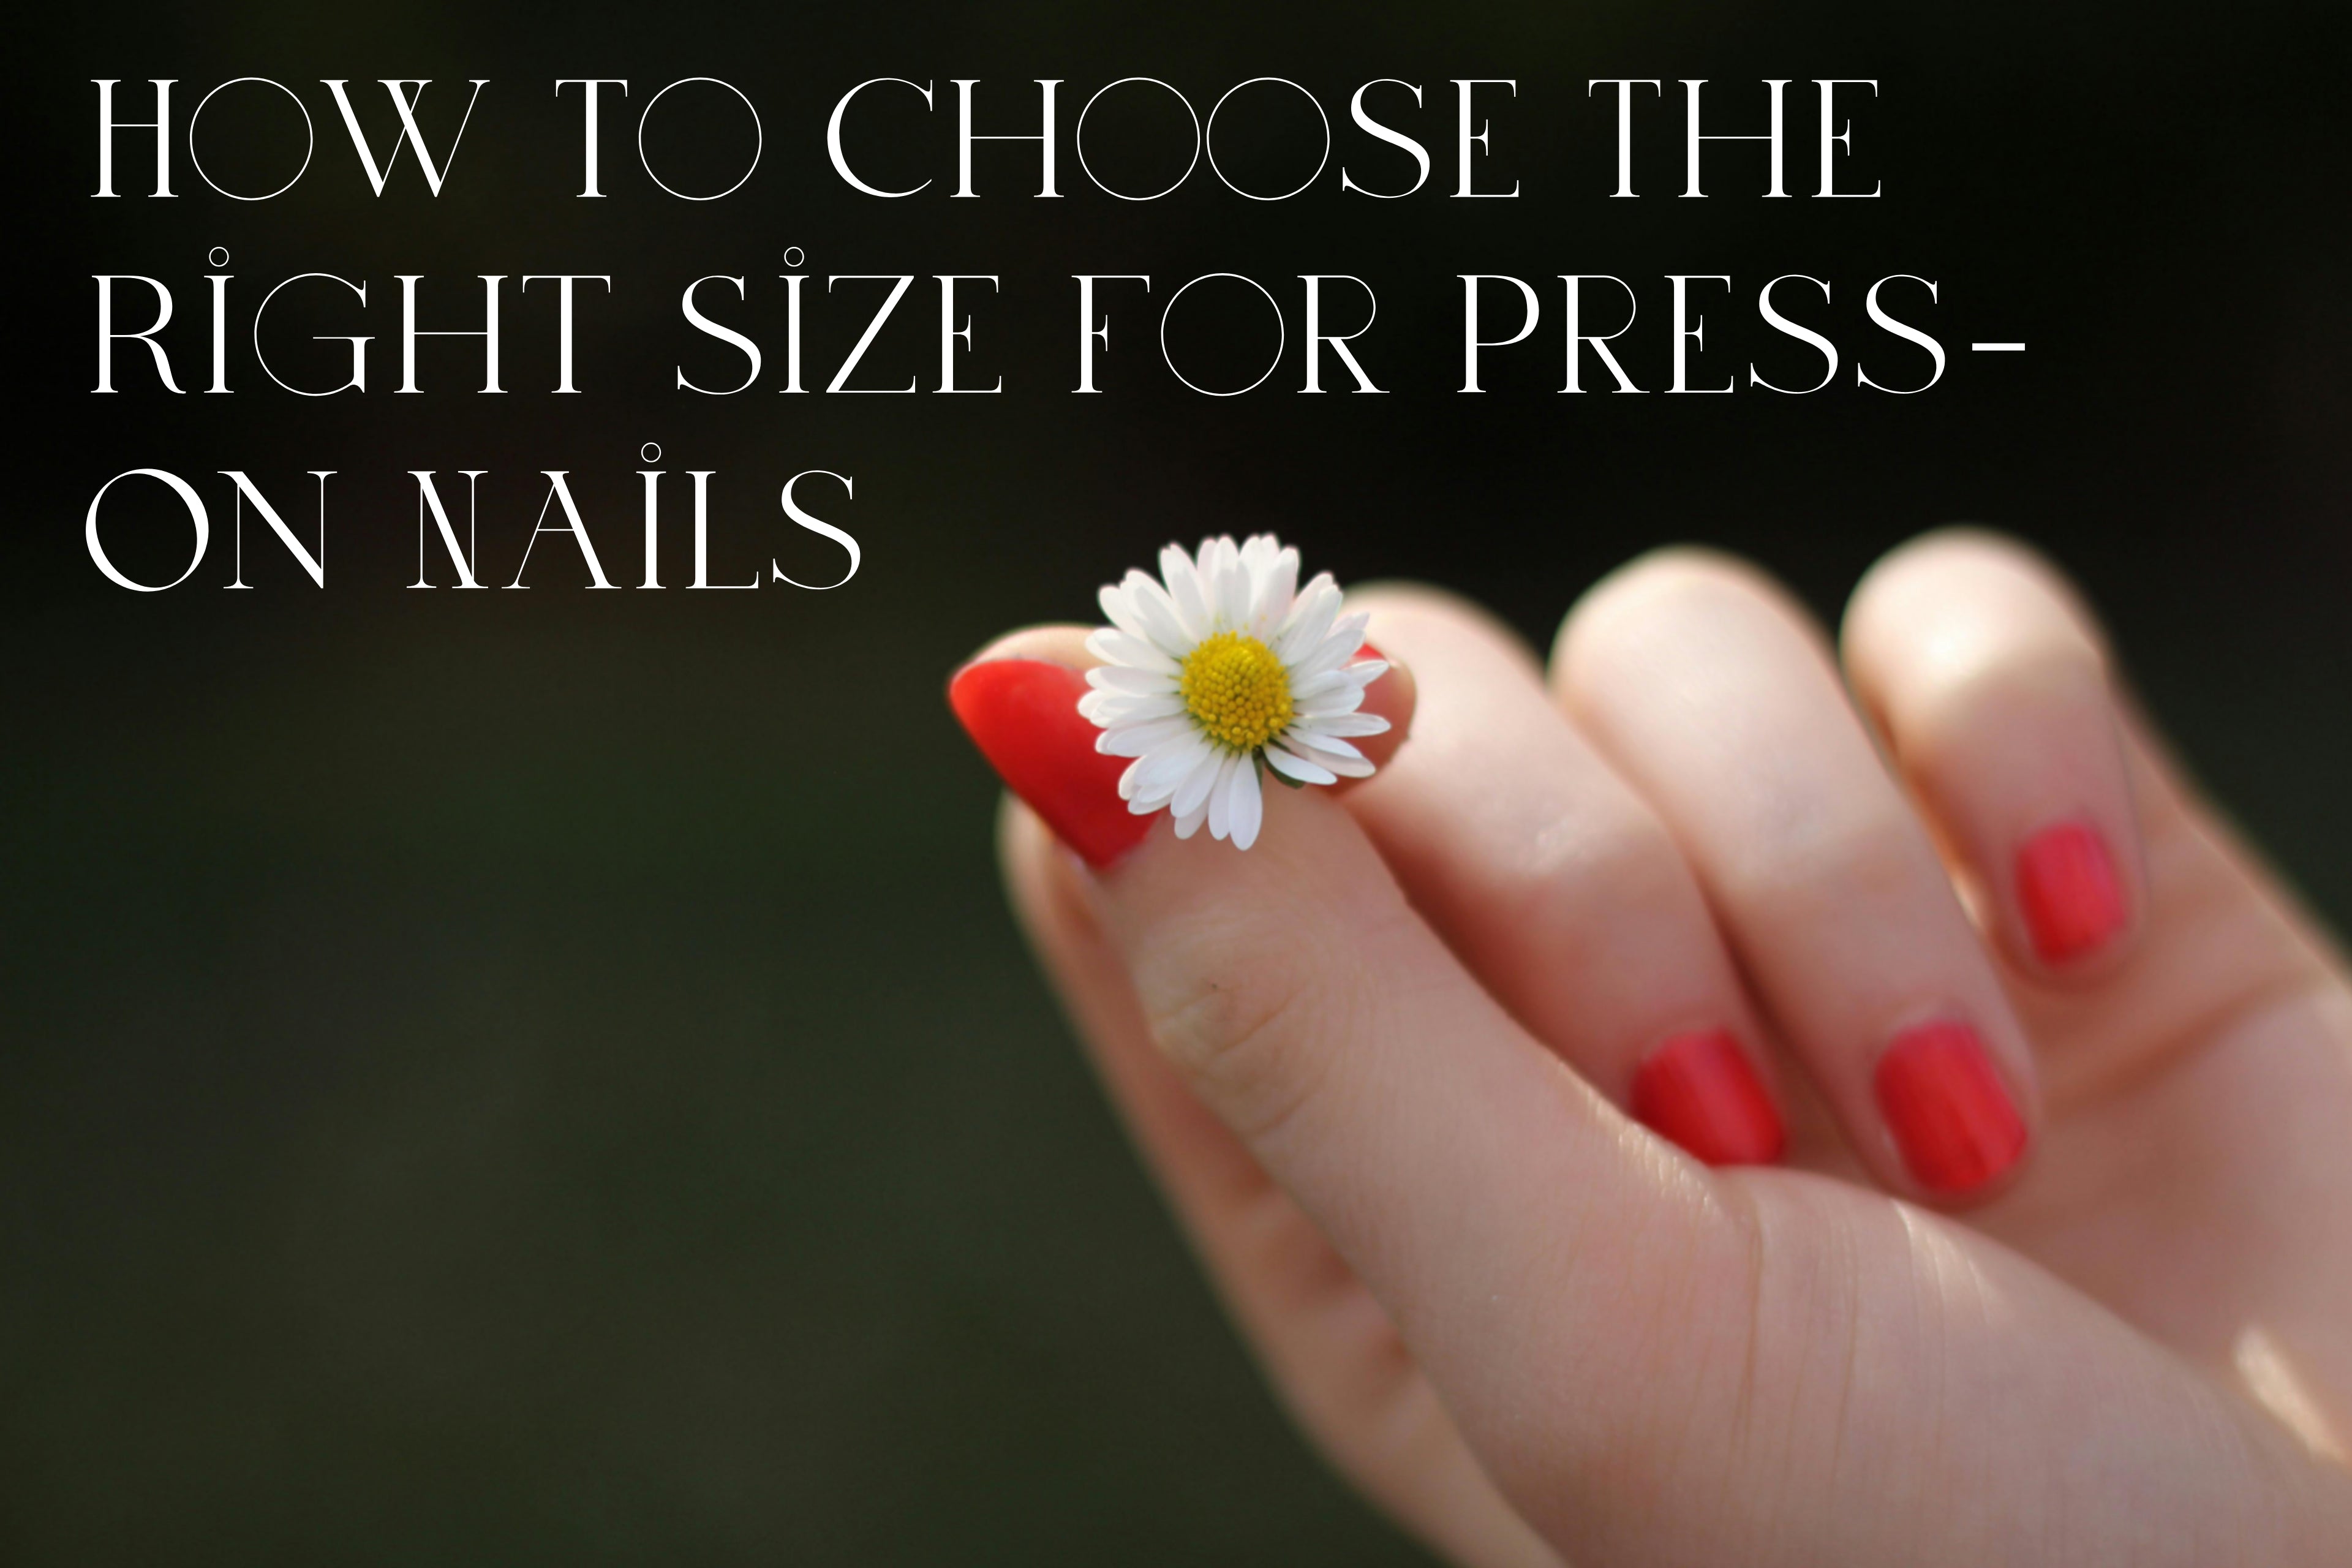 How To Choose The Right Size For Press-On Nails